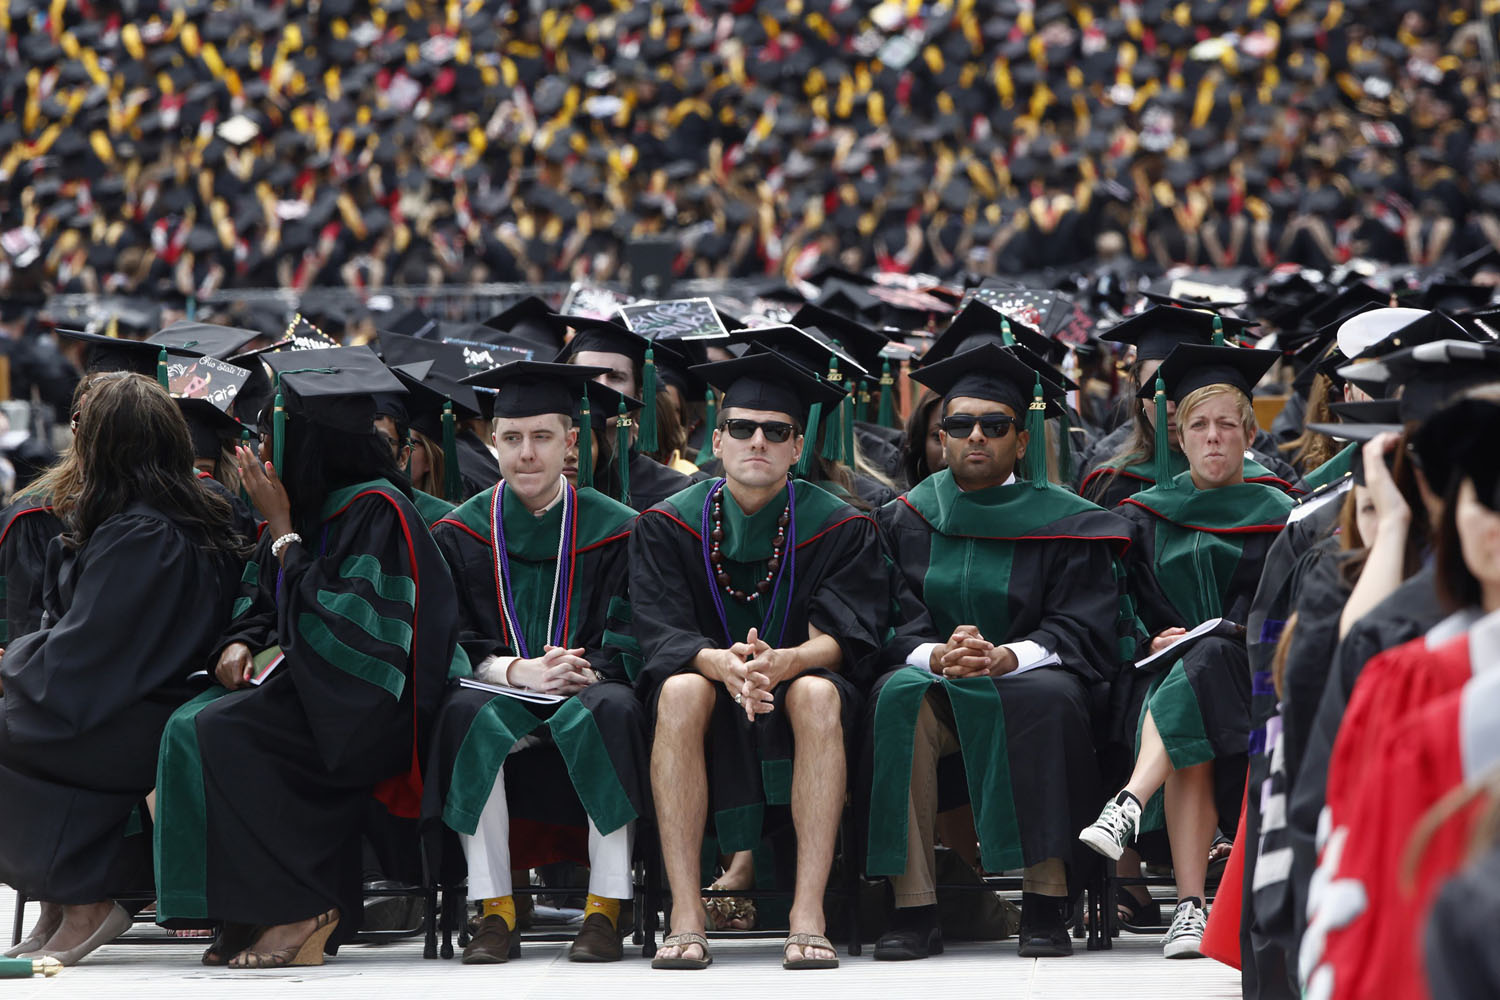 A student in flip flops and shorts attends commencement at Ohio State University